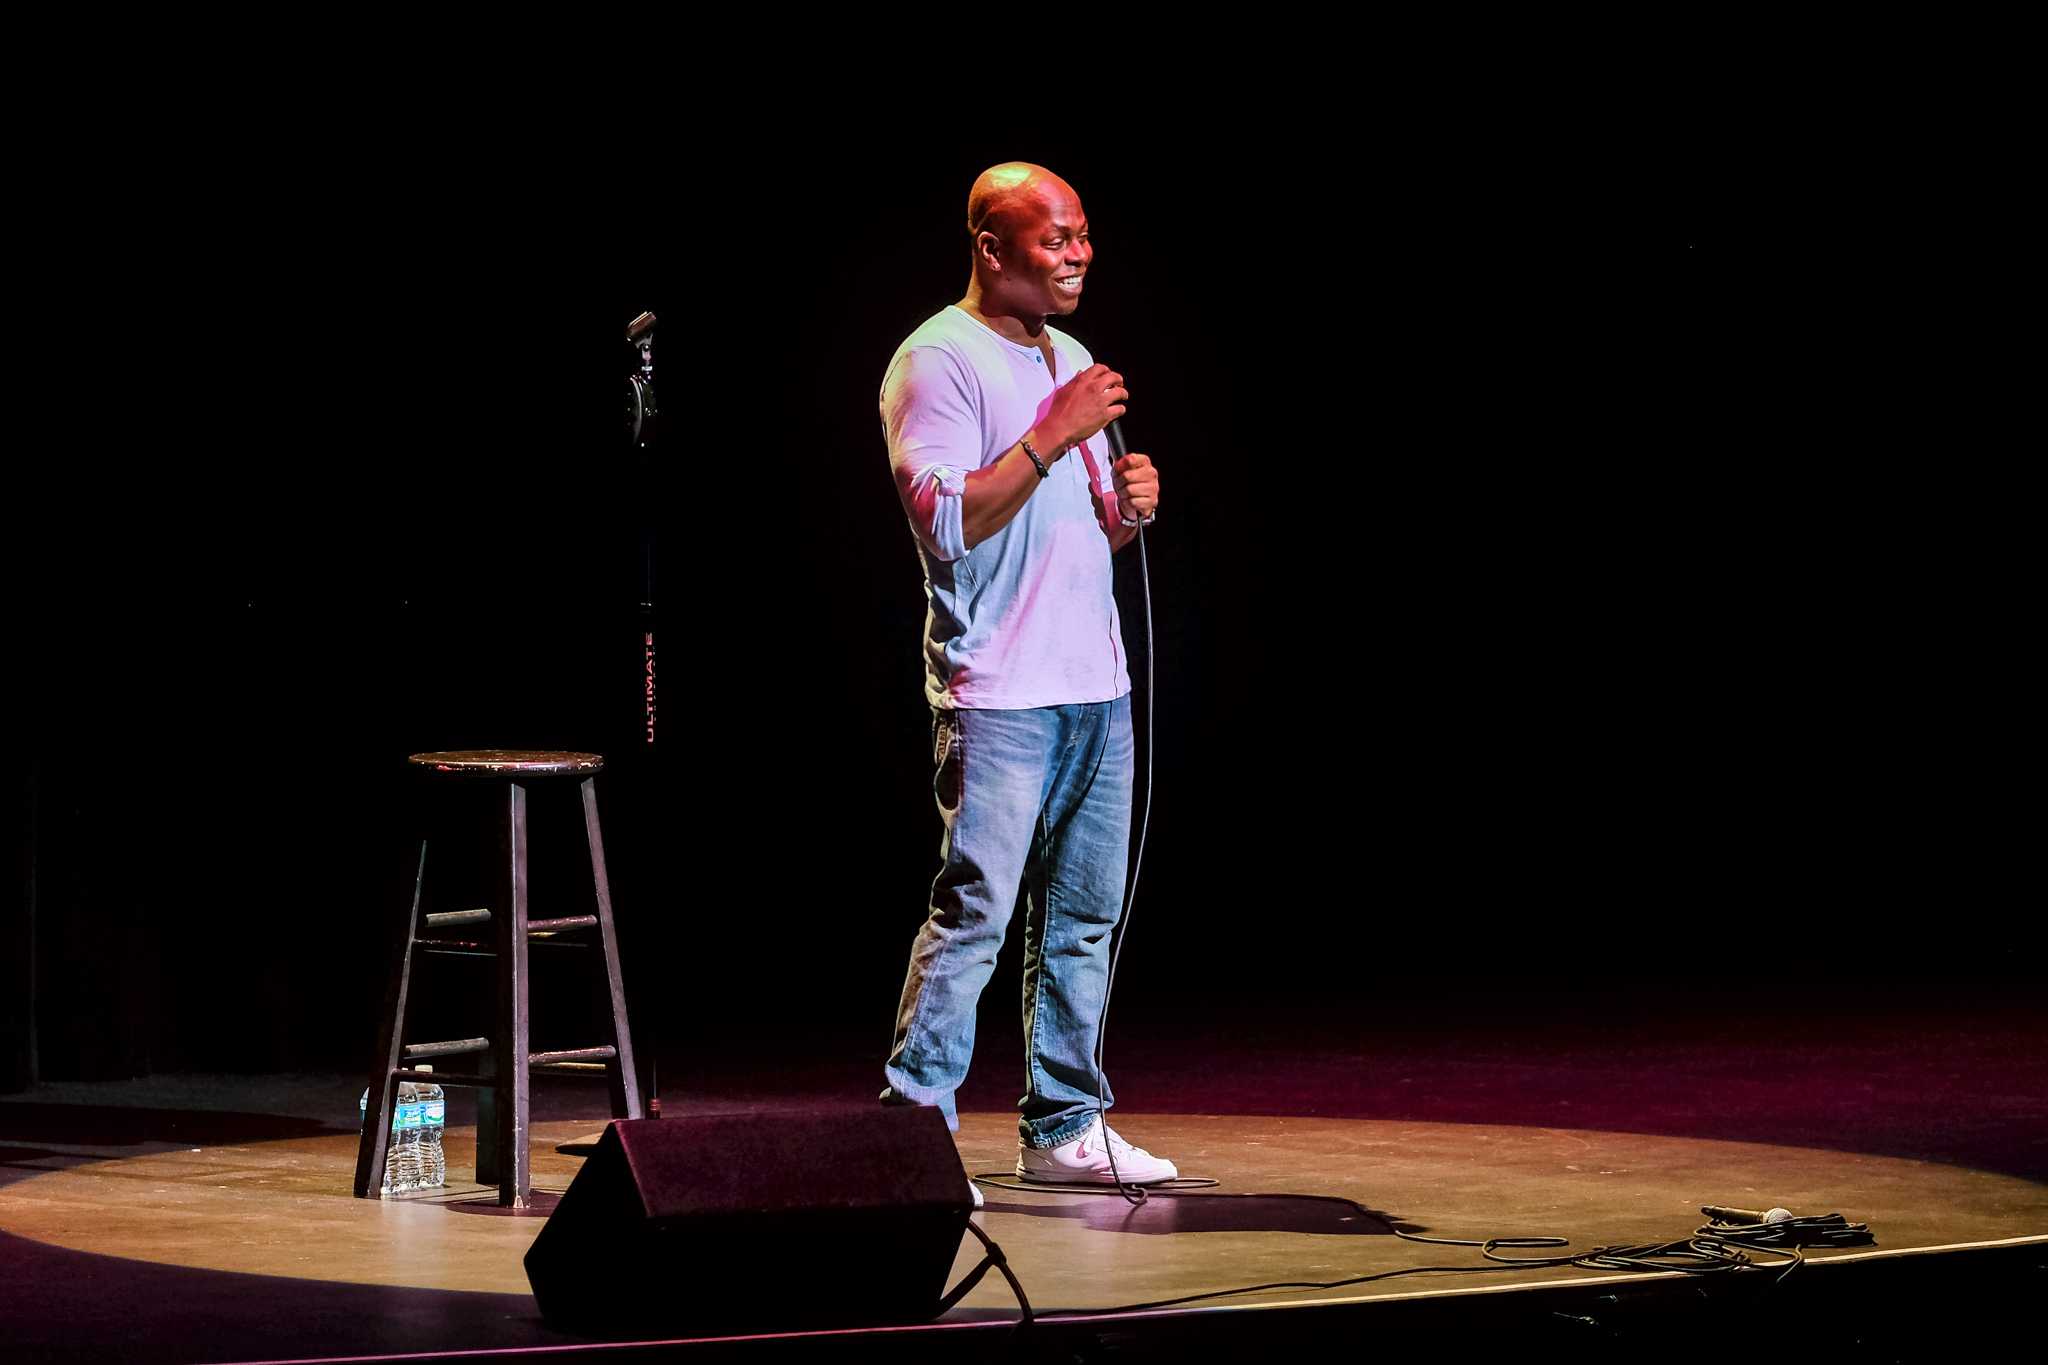 Gene Harding was the second comedian to perform. ”As soon as people find out that you’re African, they don't want to give you their email address.” | Mohammed F Emran, Asst. Creative Director 